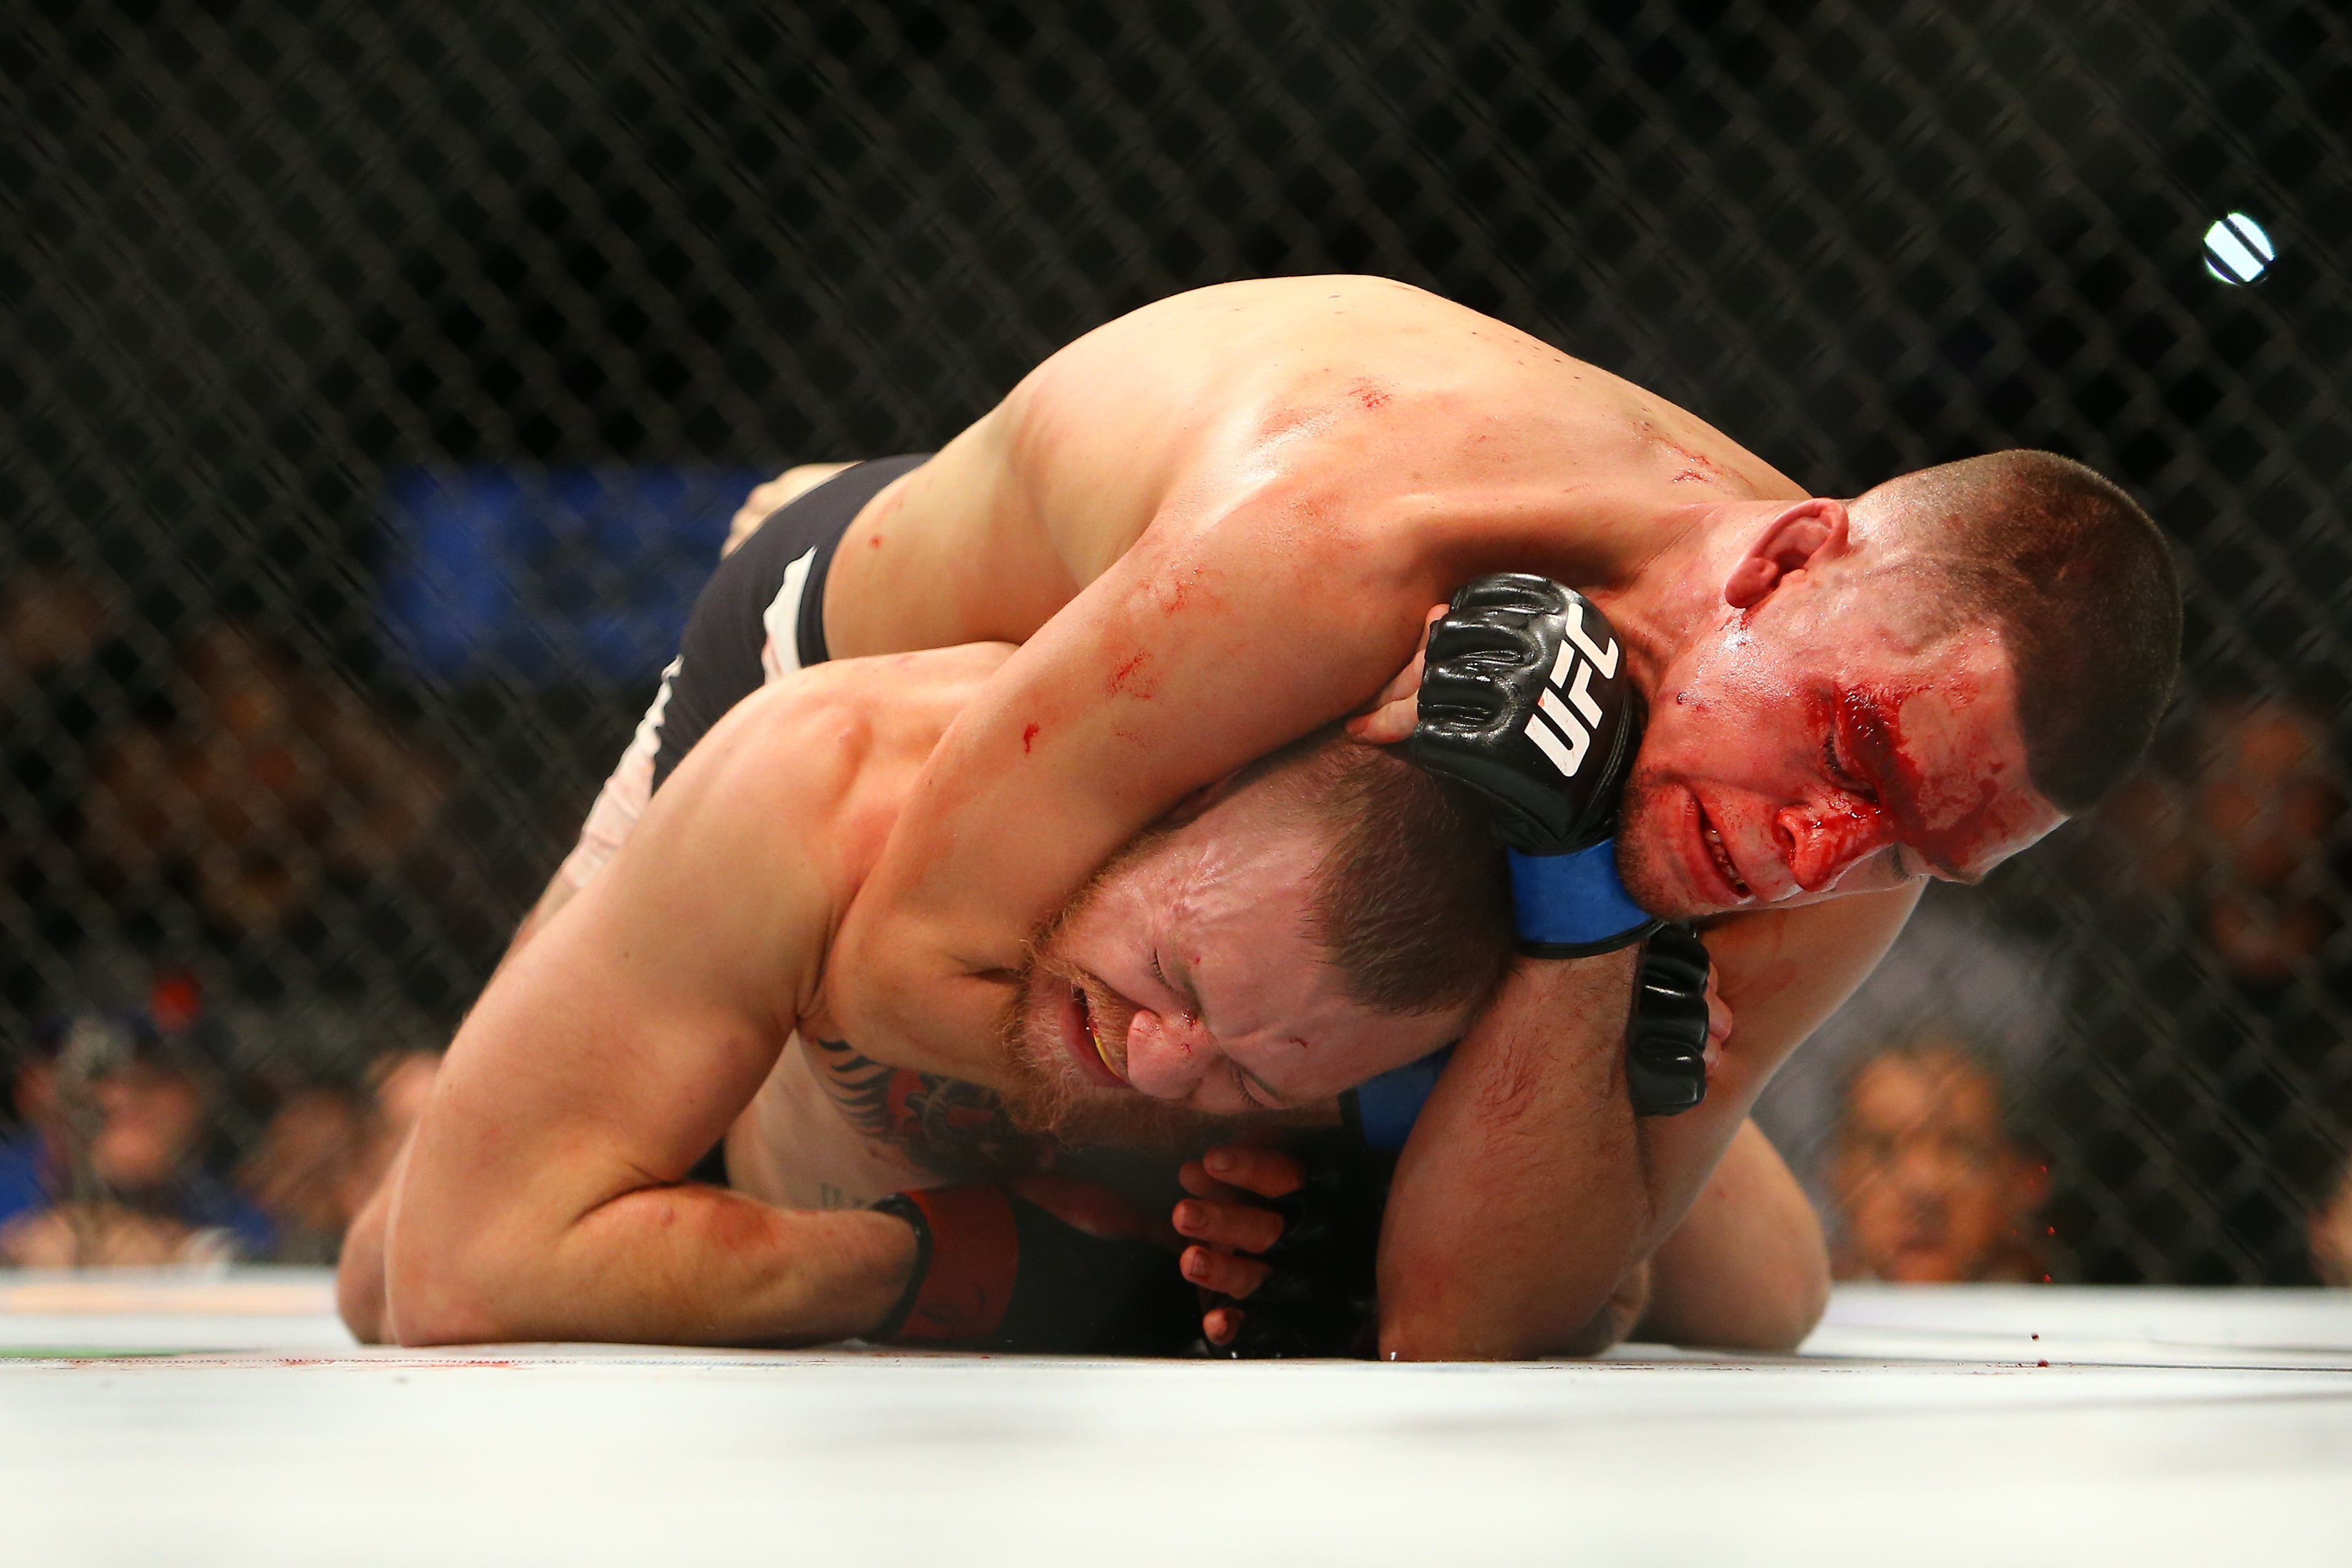 Diaz submitted Conor McGregor to the shock of the MMA world in March 2016